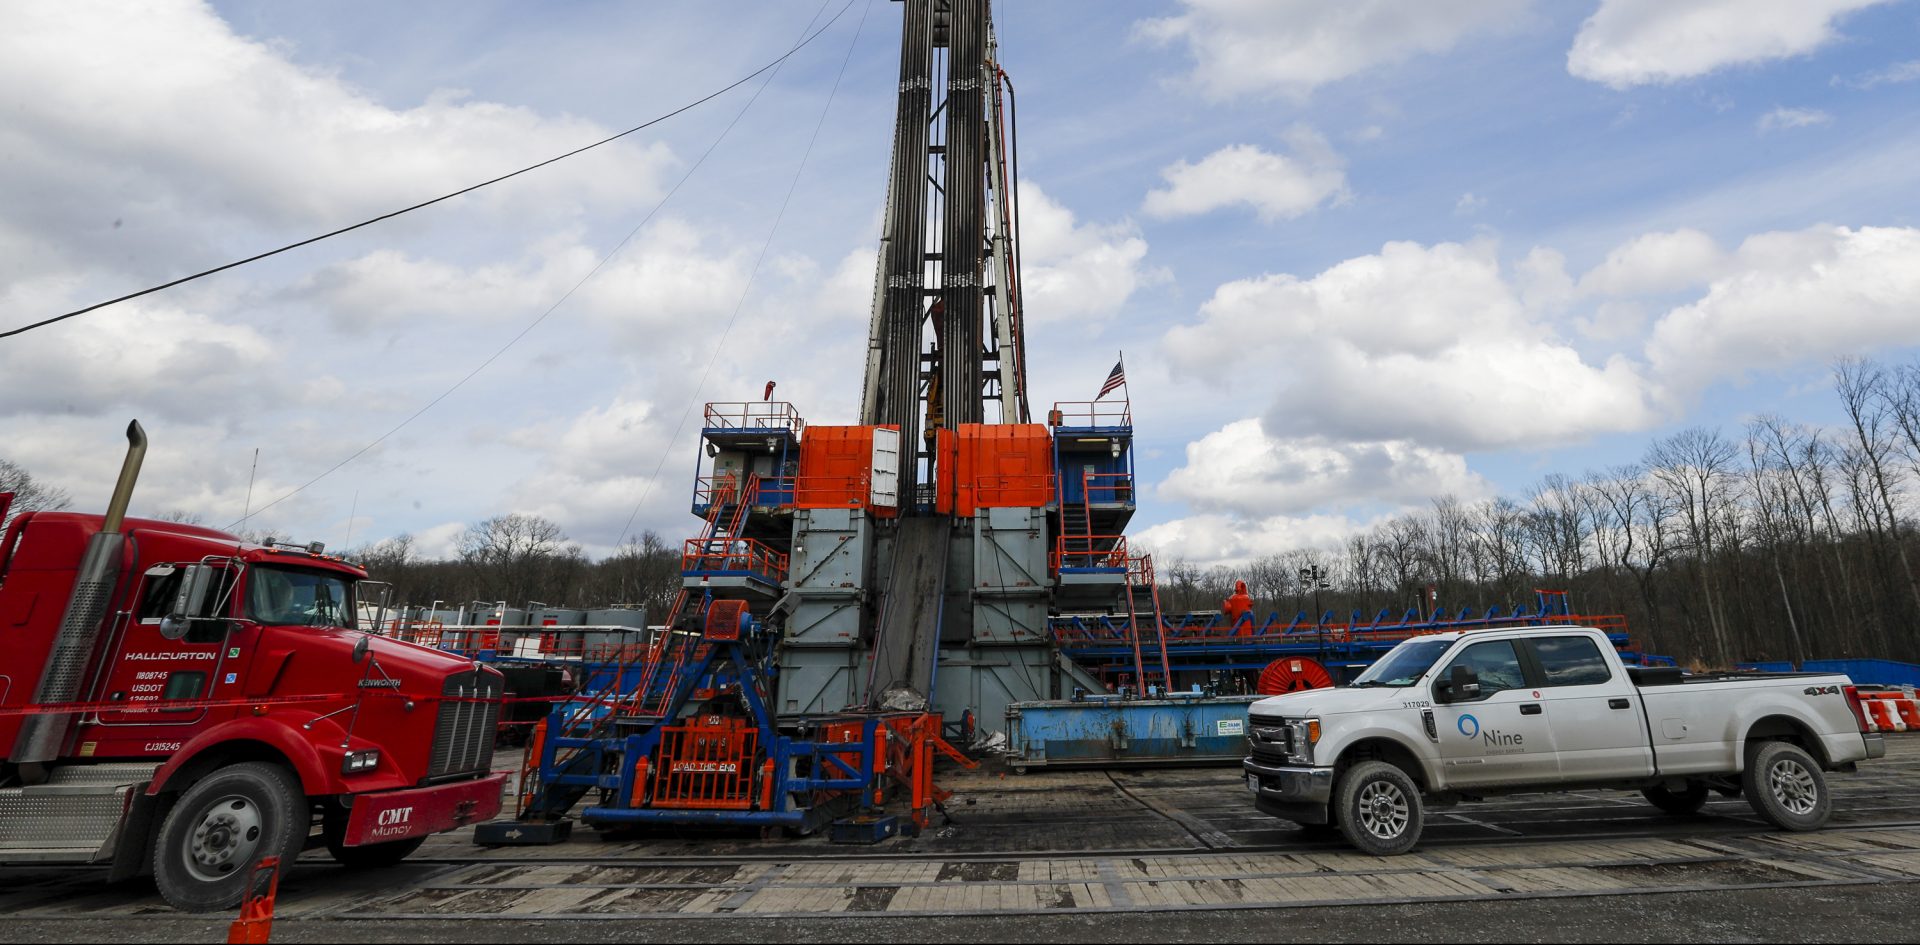 FILE—In this file photo from March 12, 2020, work continues at a shale gas well drilling site in St. Mary's, Pa. 